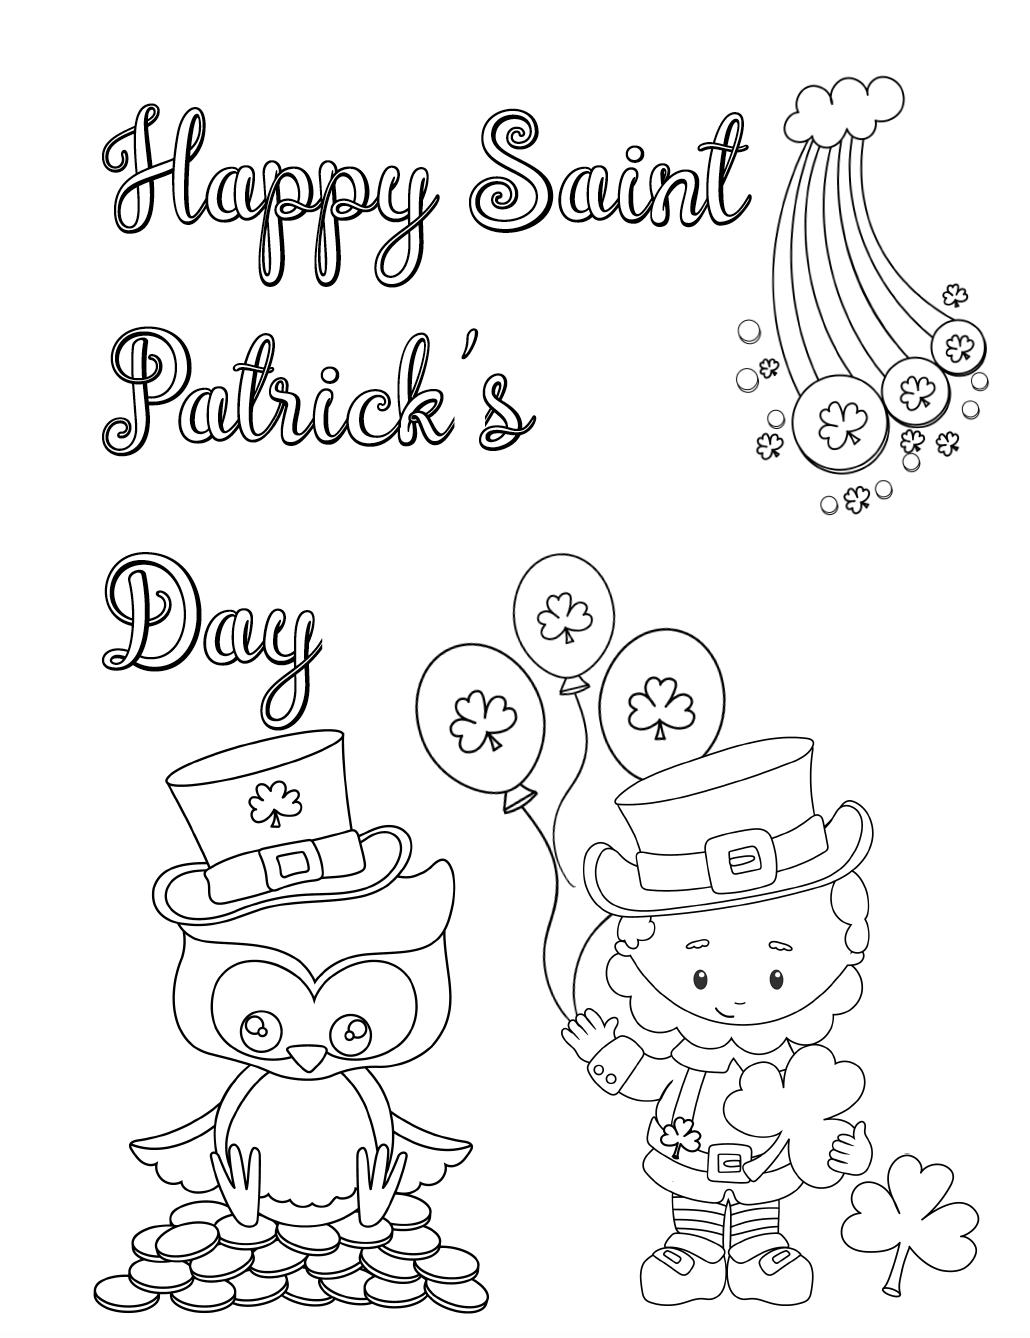 Free Printable St Patrick s Day Coloring Pages 4 Designs 